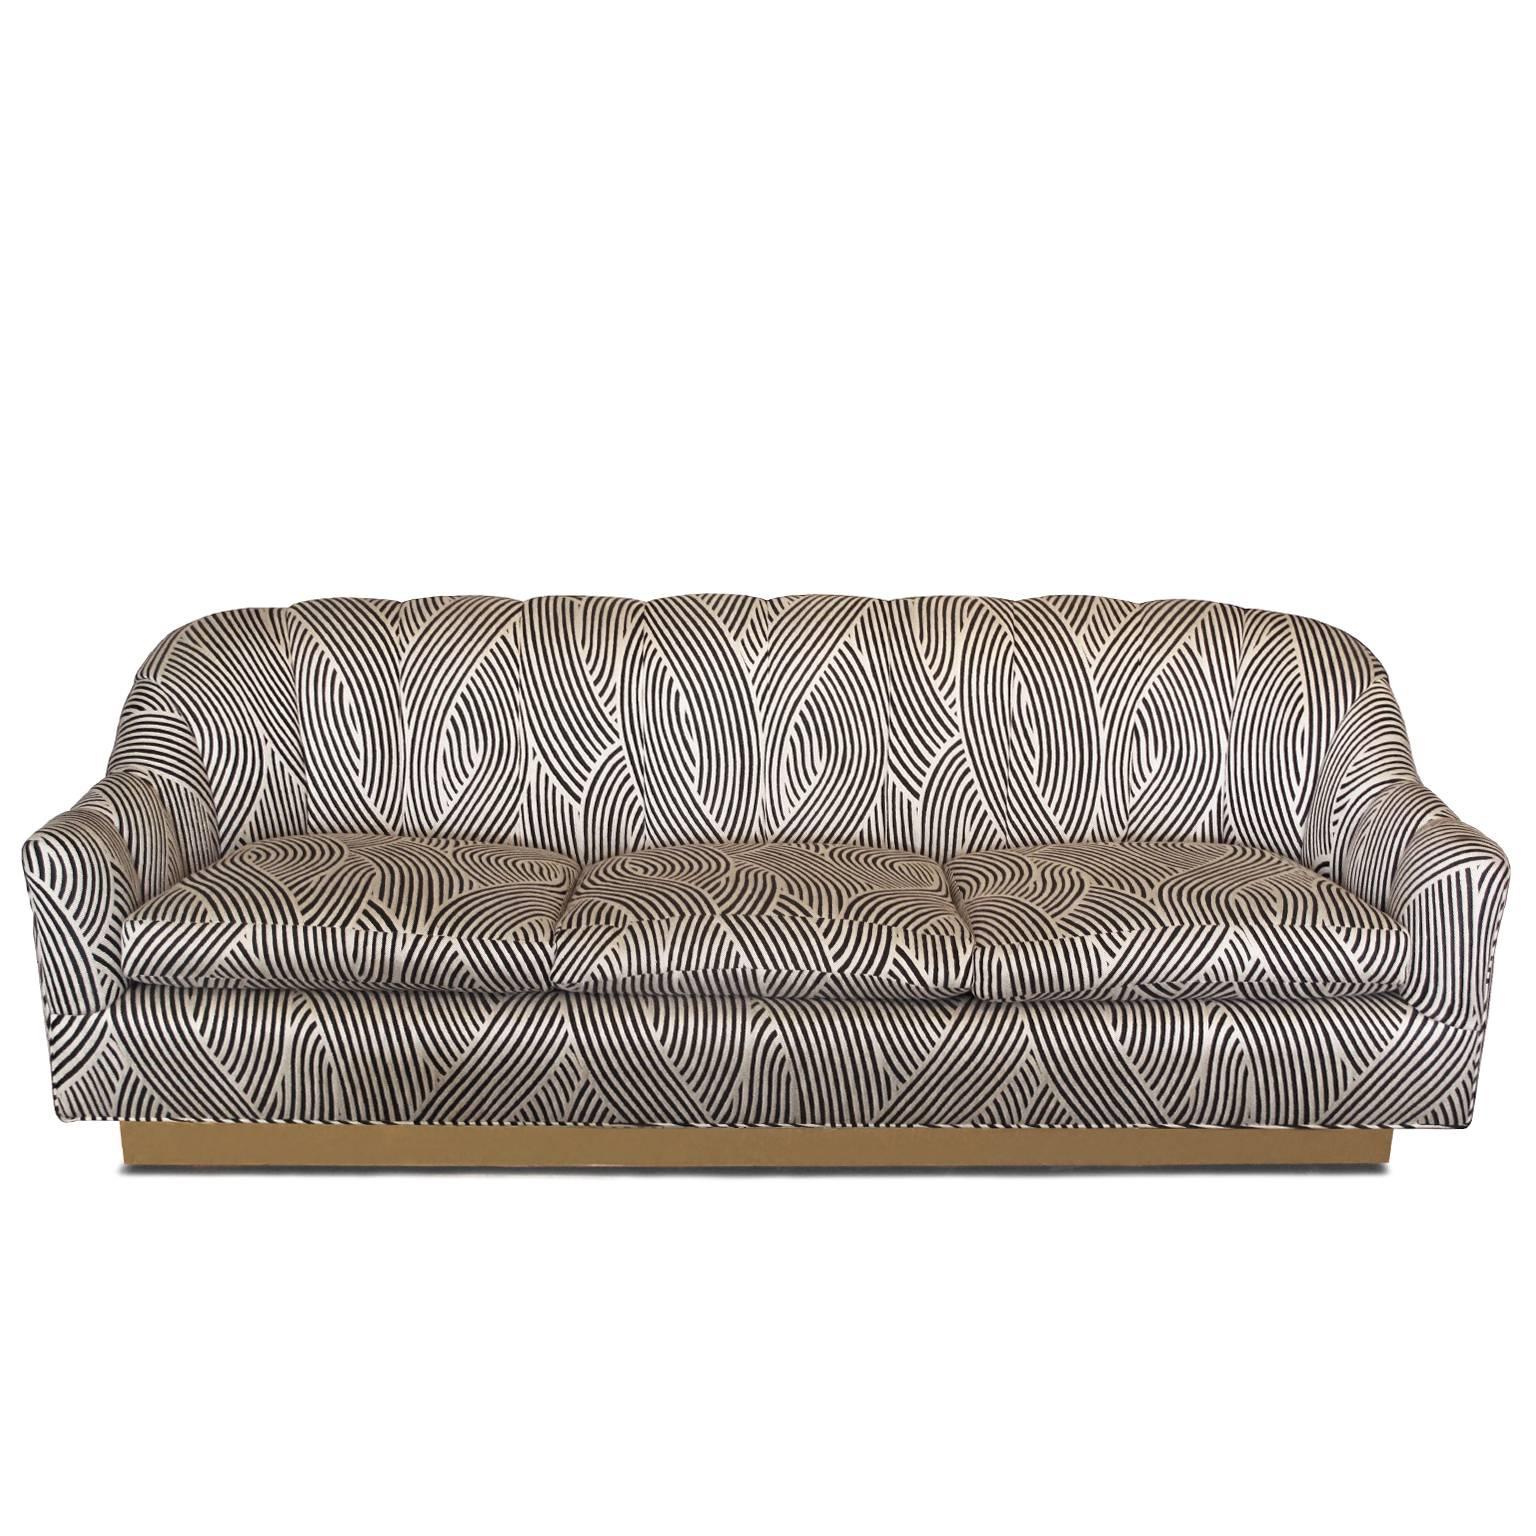 Vintage Graphic Black and Tan Sofa on Brass Base